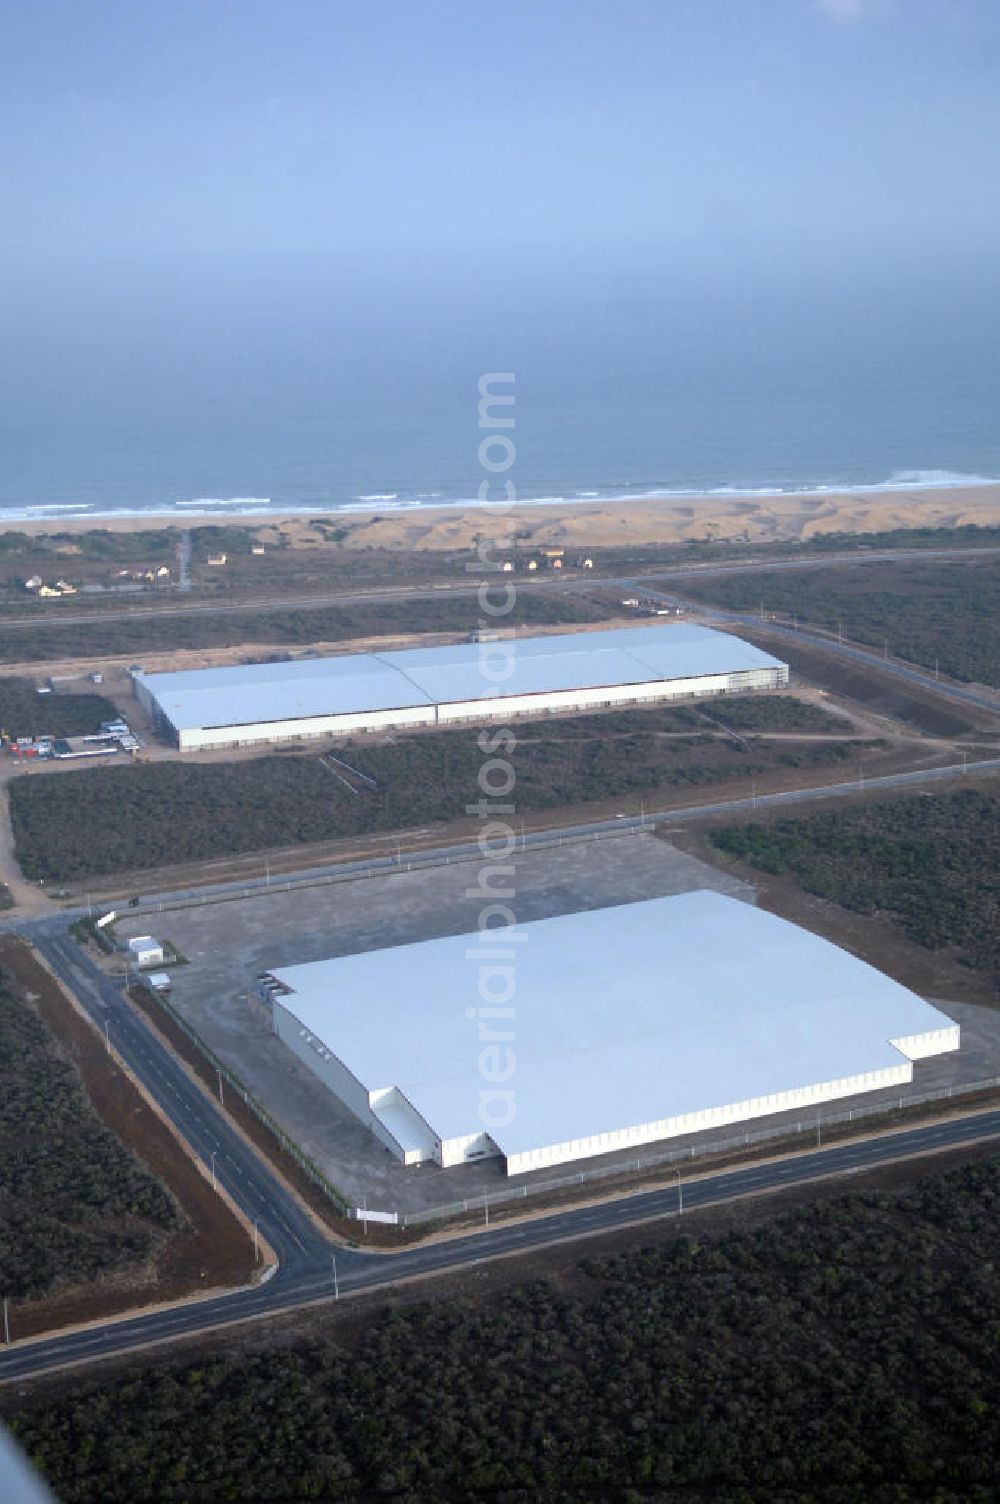 Aerial image PORT ELIZABETH - Warehouse of P E Cold Storage Ltd. in the industrial area at the coast of Port Elizabeth, South Africa. The region's industrial landscape is especially dominated by several weaving mills and the car industry